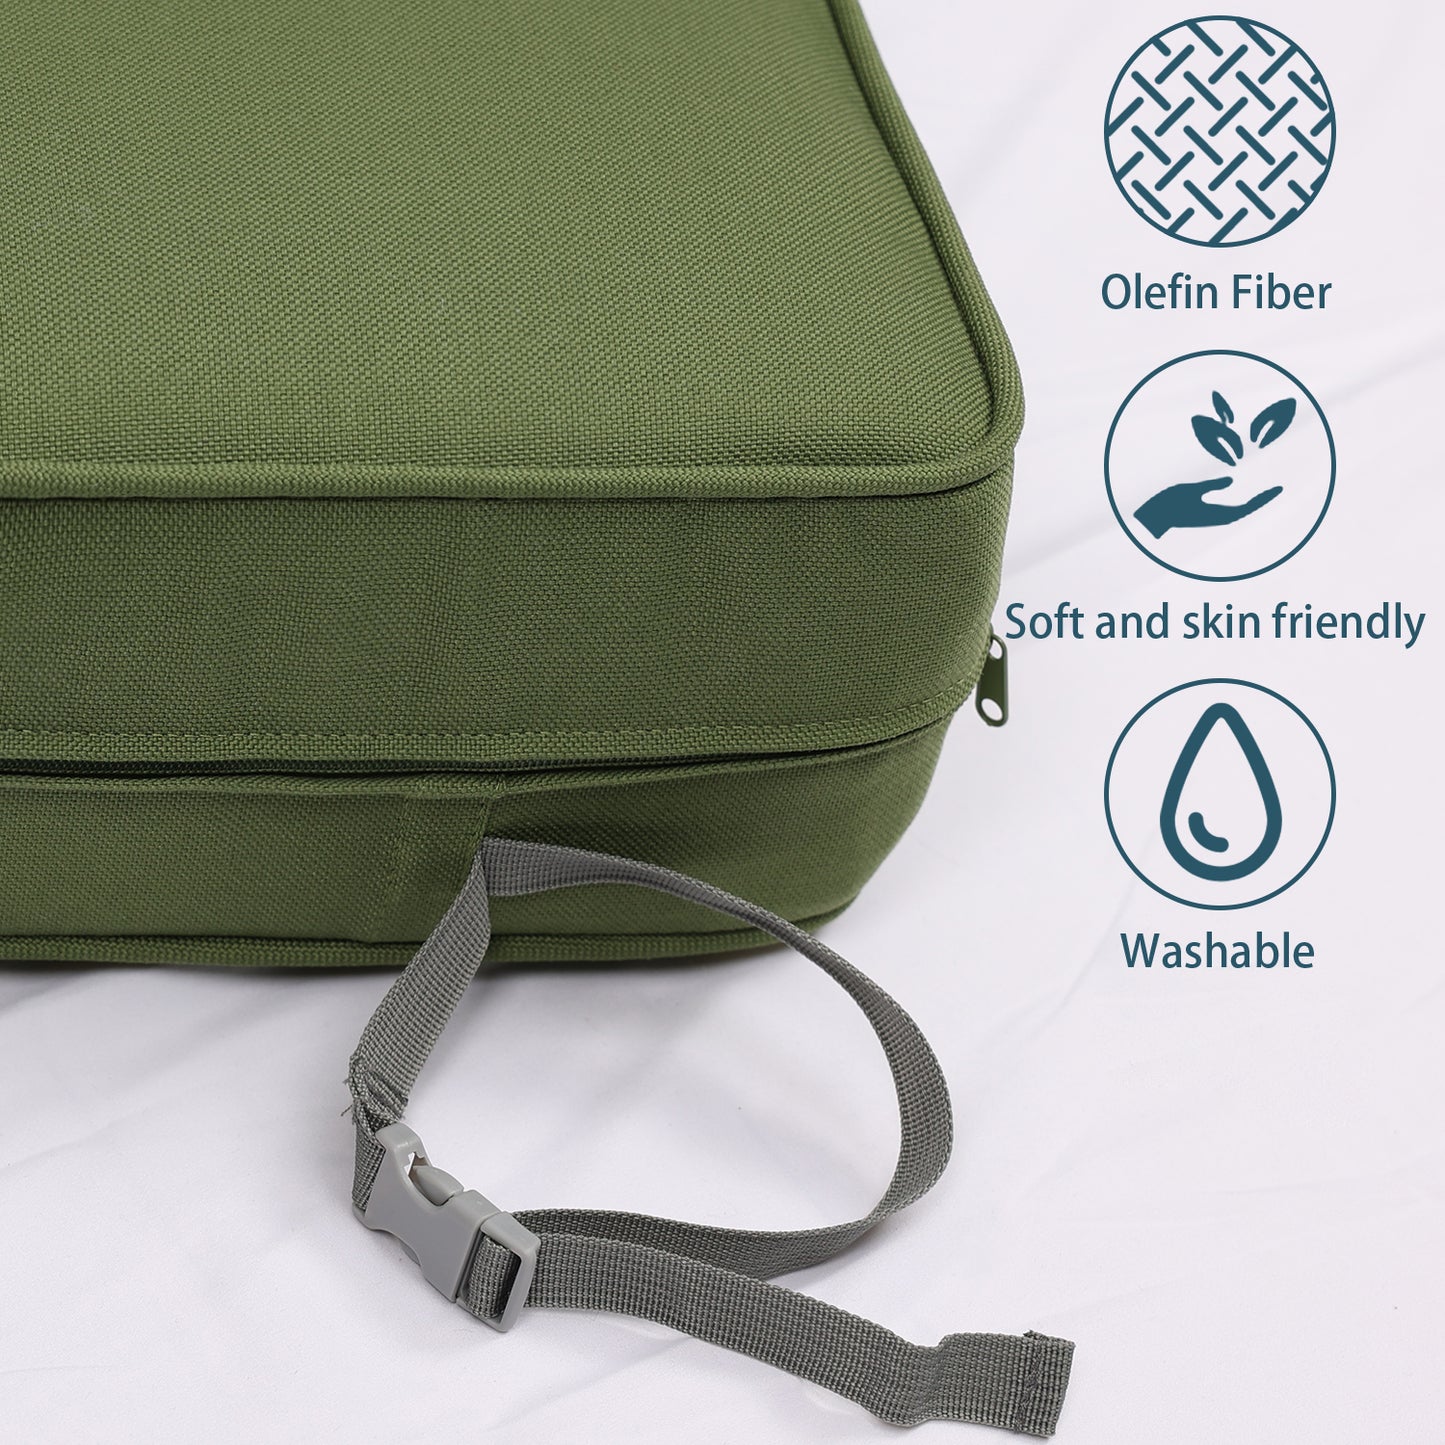 Patio Deep Chair Cushion - Set of 2 - Total 6 pieces (Green)